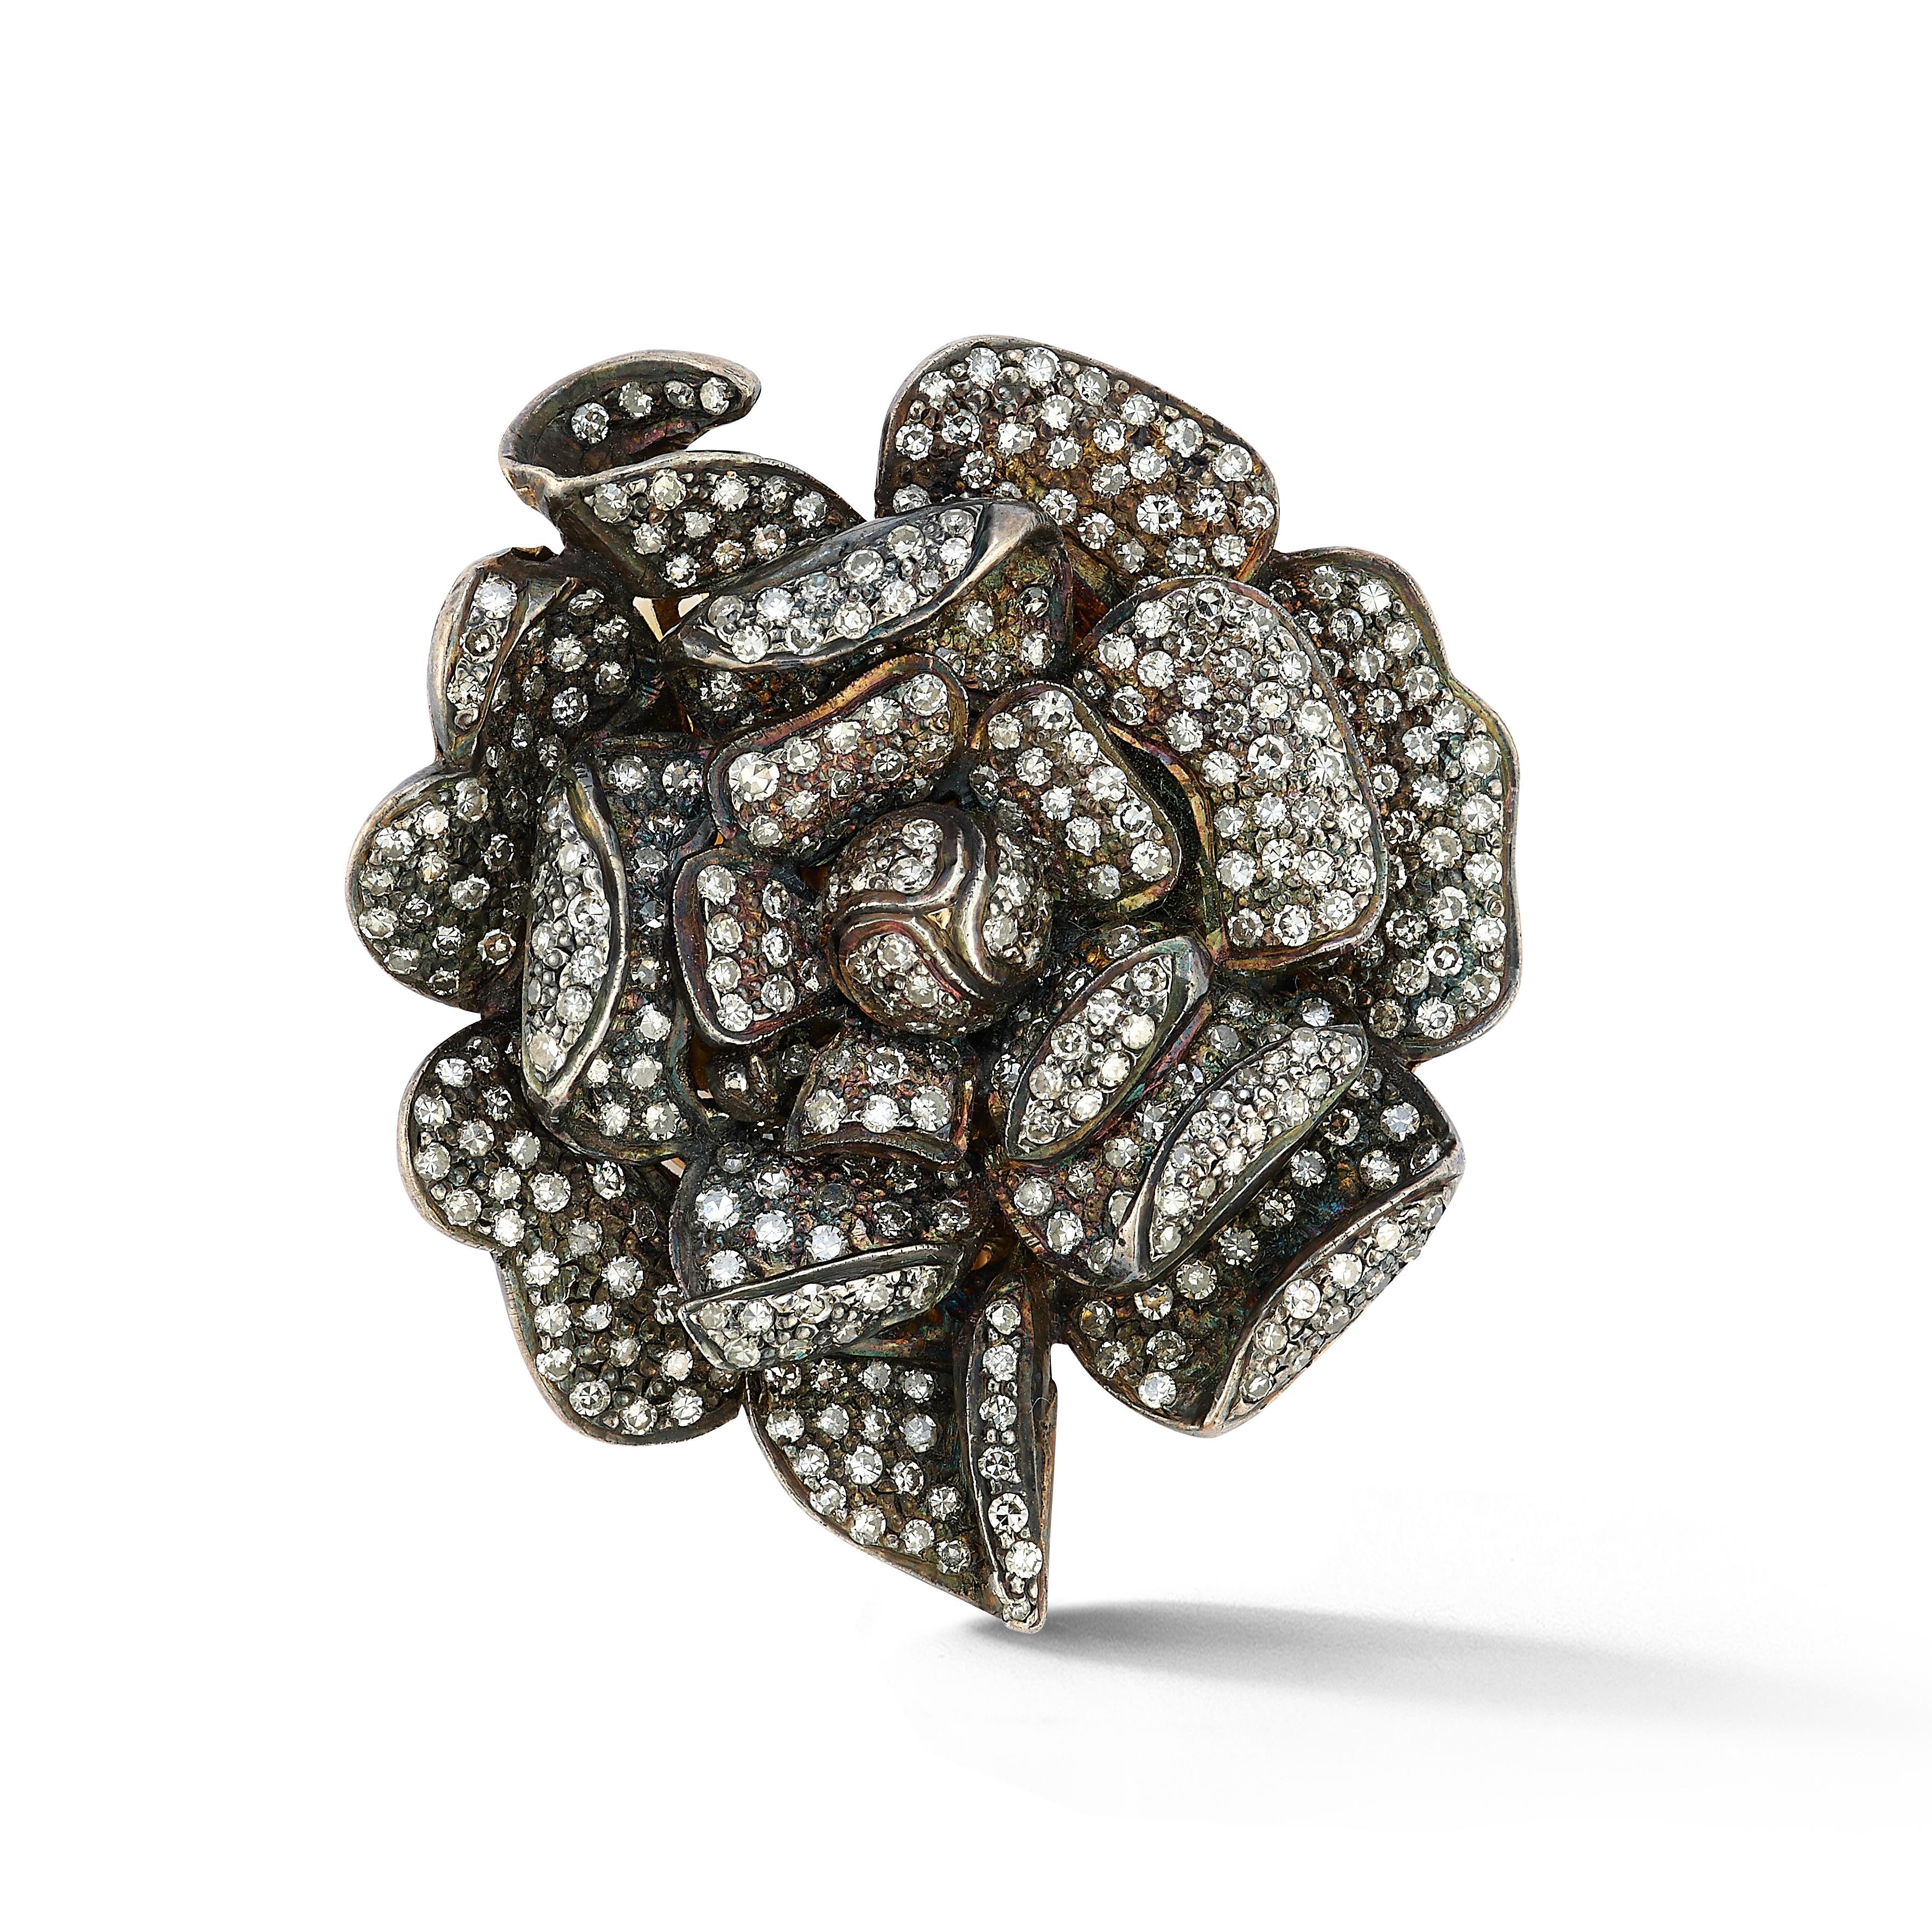 Diamond Flower Brooch, 

A flower motif brooch featuring approximately 4.67 carats of round cut pave diamonds, set in 18k yellow gold & silver.

Diameter: 1.5